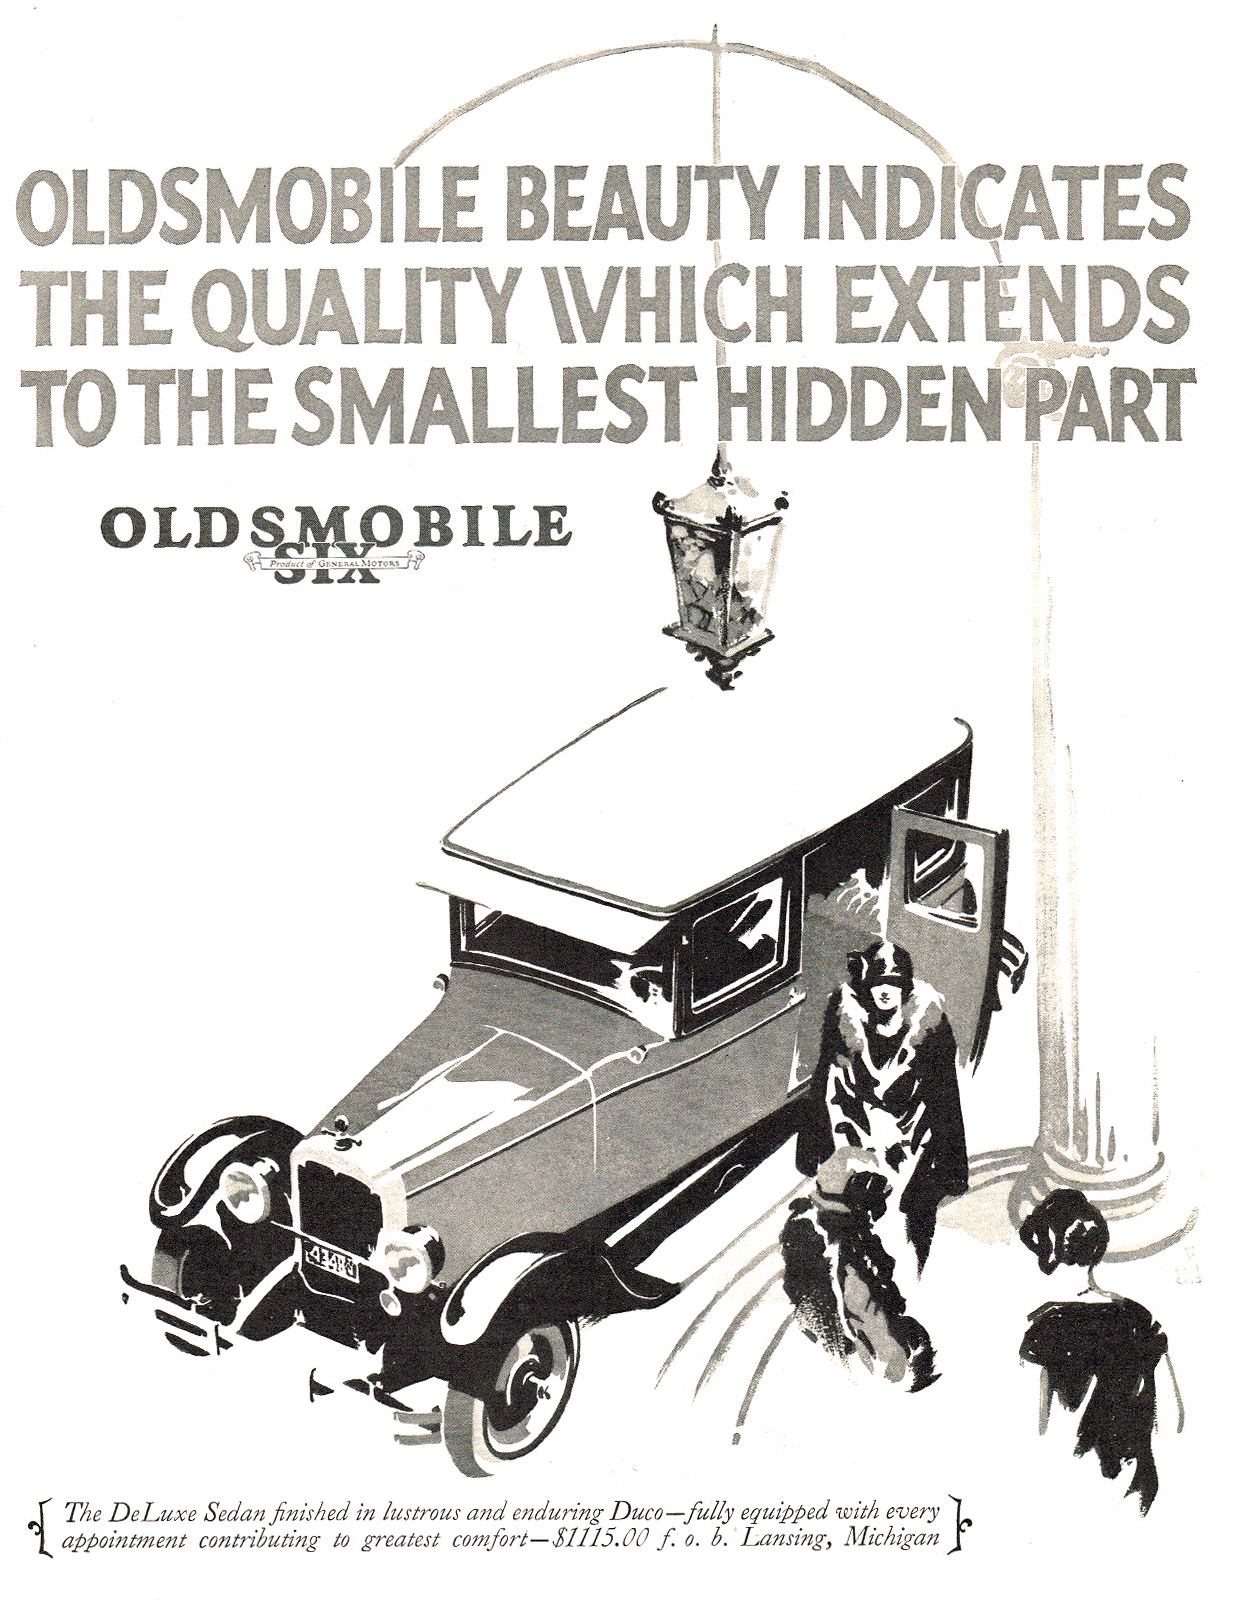 Oldsmobile Six DeLuxe Sedan Ad (February-March, 1926): Oldsmobile beauty indicates the quality which extends to the smallest hidden part - Illustrated by Fred Cole